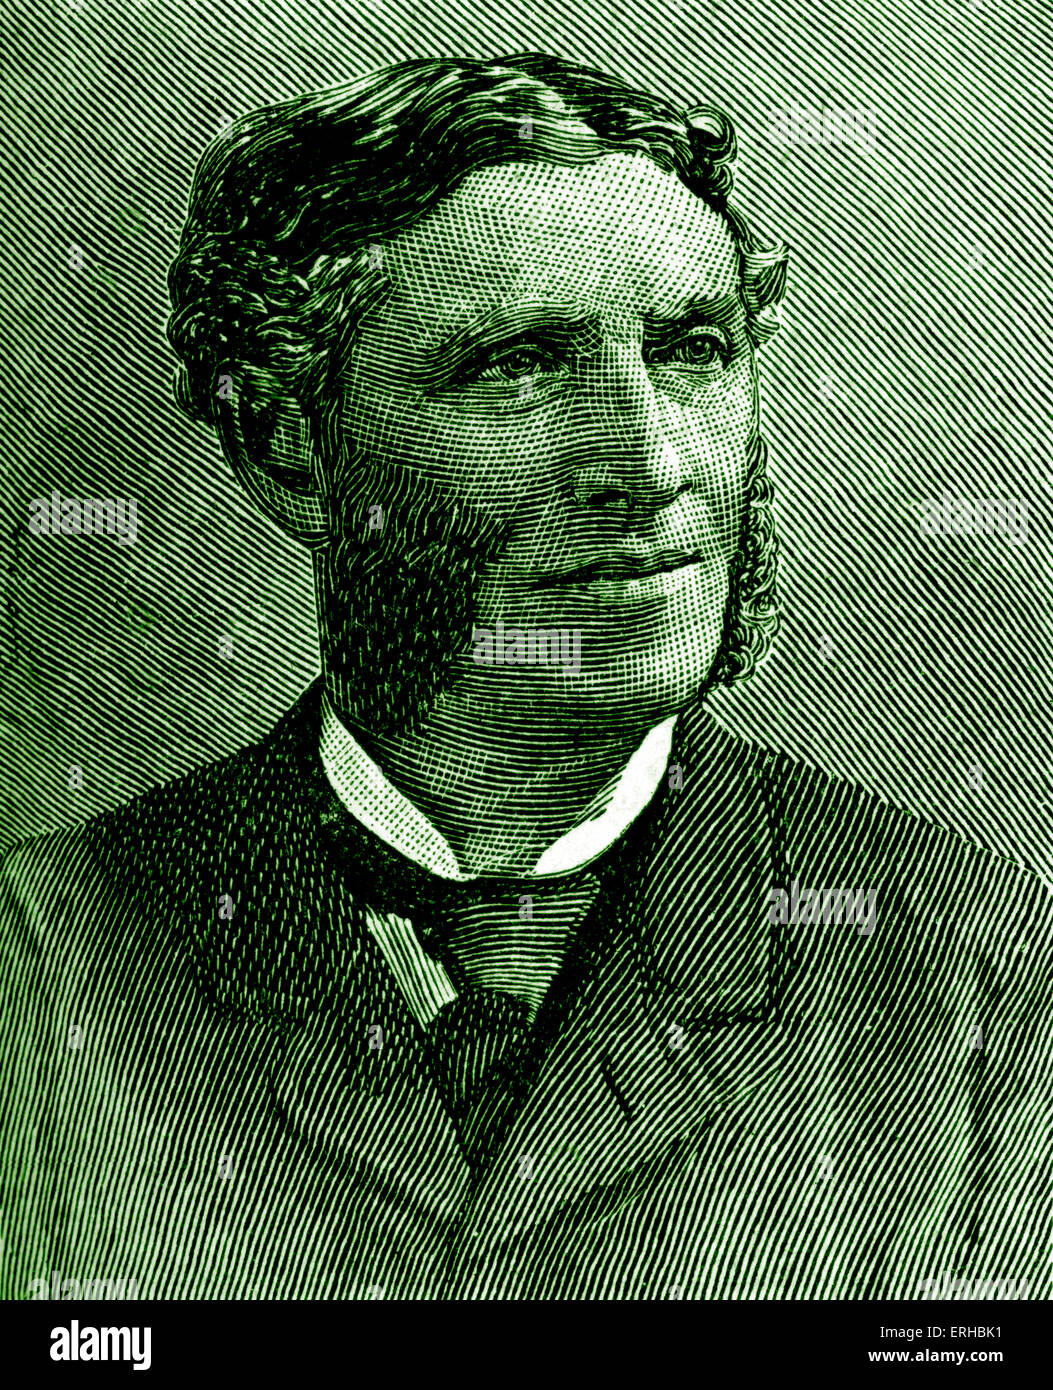 Matthew Arnold (1822 – 1888). A British poet and cultural critic. Illustration after a photograph by Sarony. Stock Photo